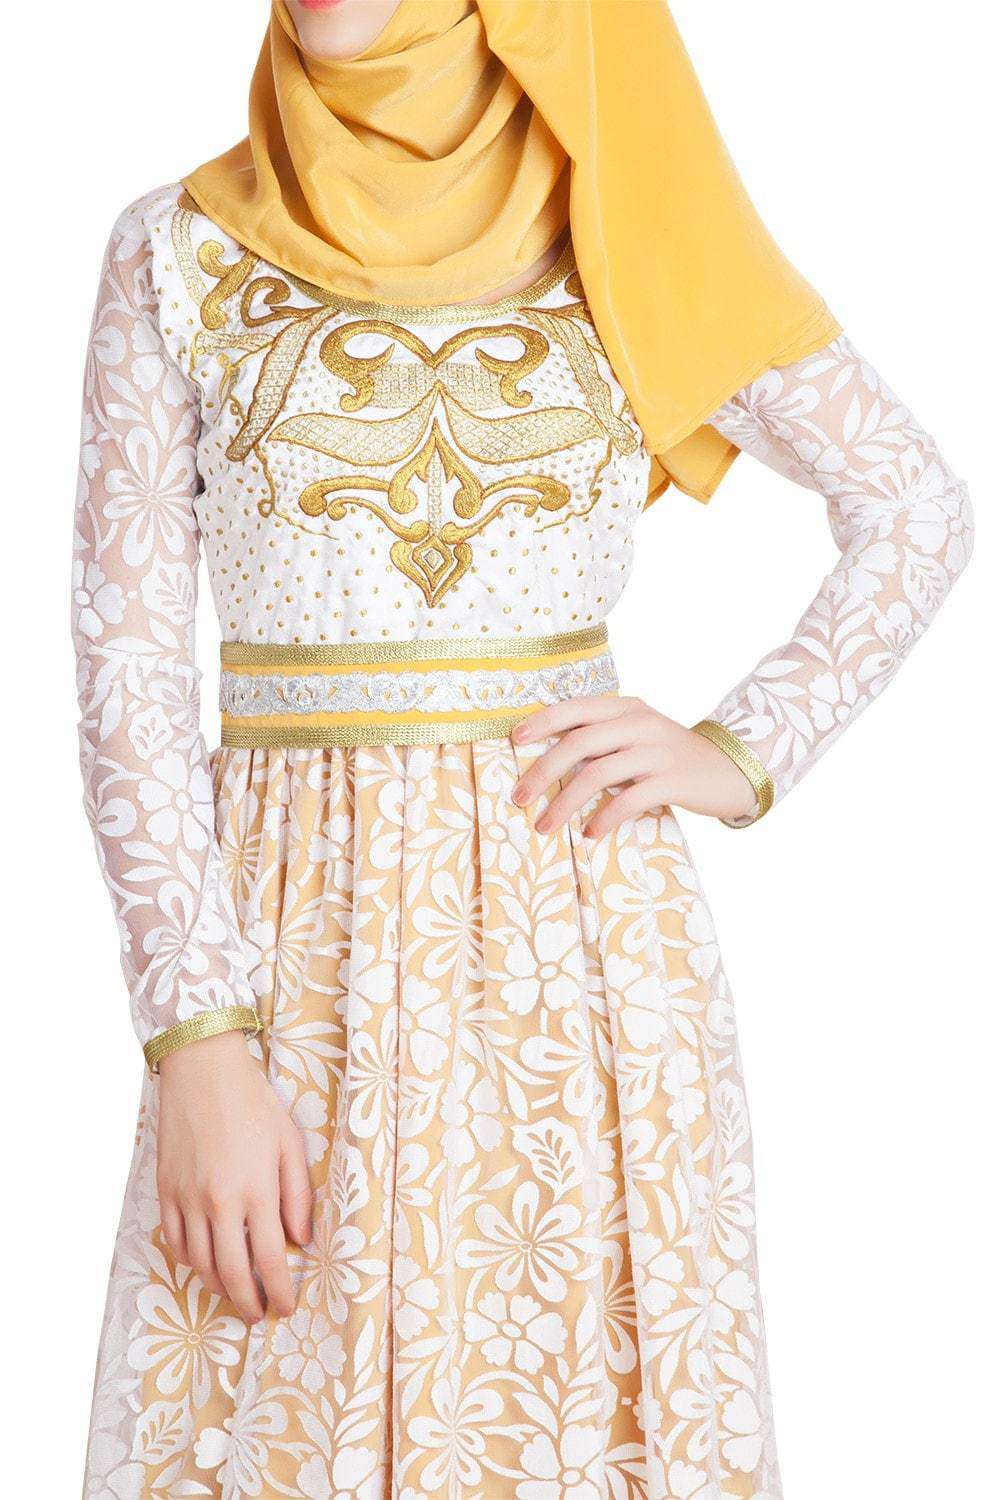 White & Gold Color Arabic Evening Dress With Net Brasso and Thread Work Caftan